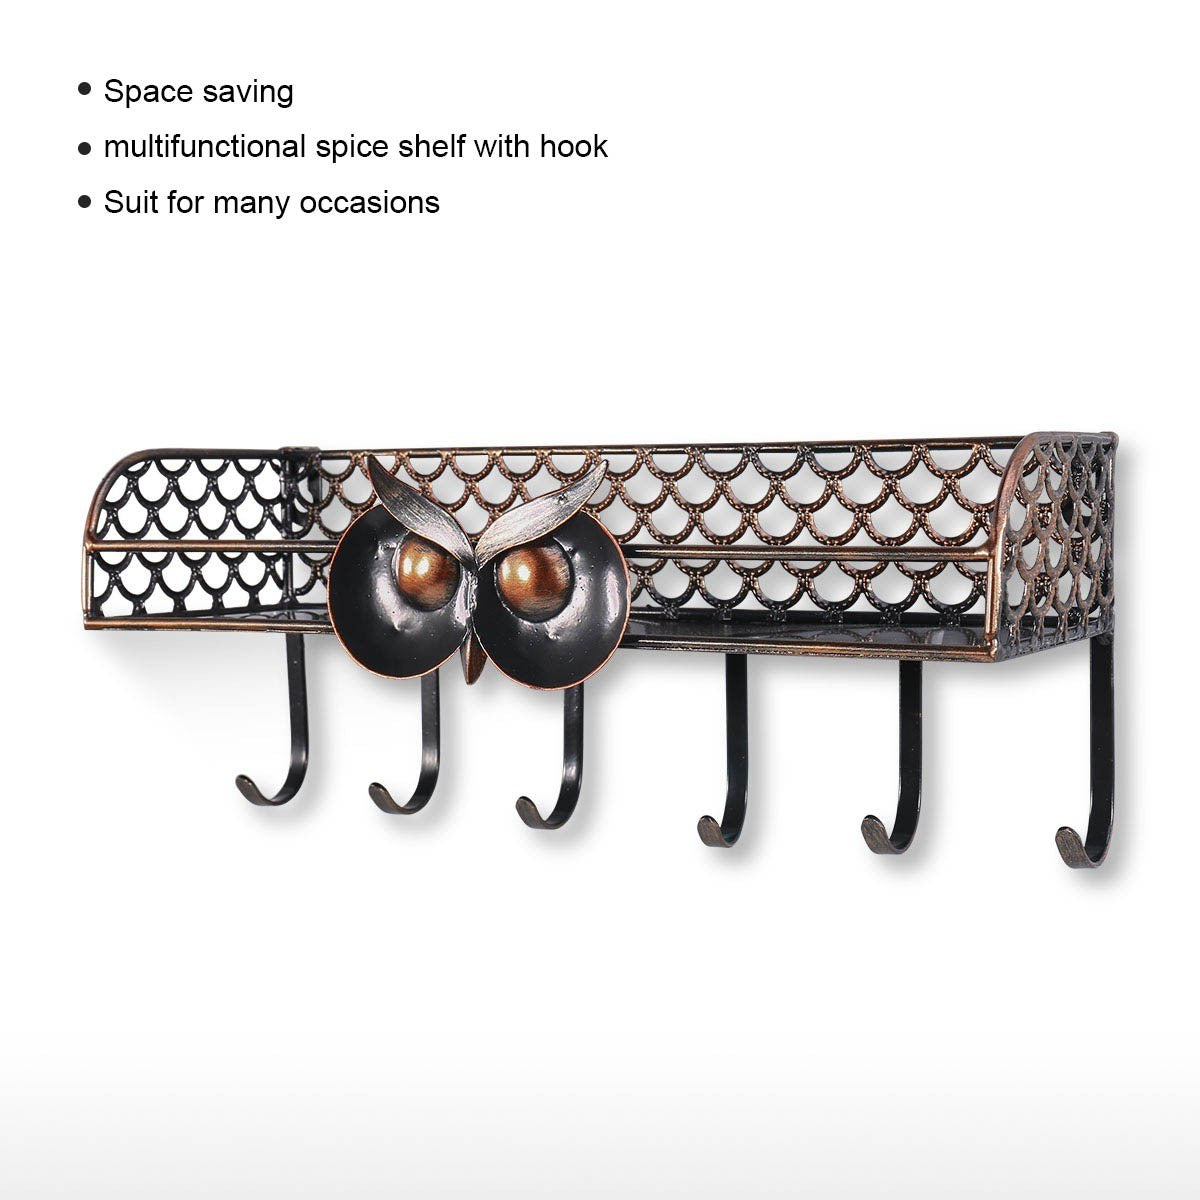 Metal Owl Black Color Vintage Style Coat Rack with Wall Mounted Shelves for Key or Kitchen Holder Organizer